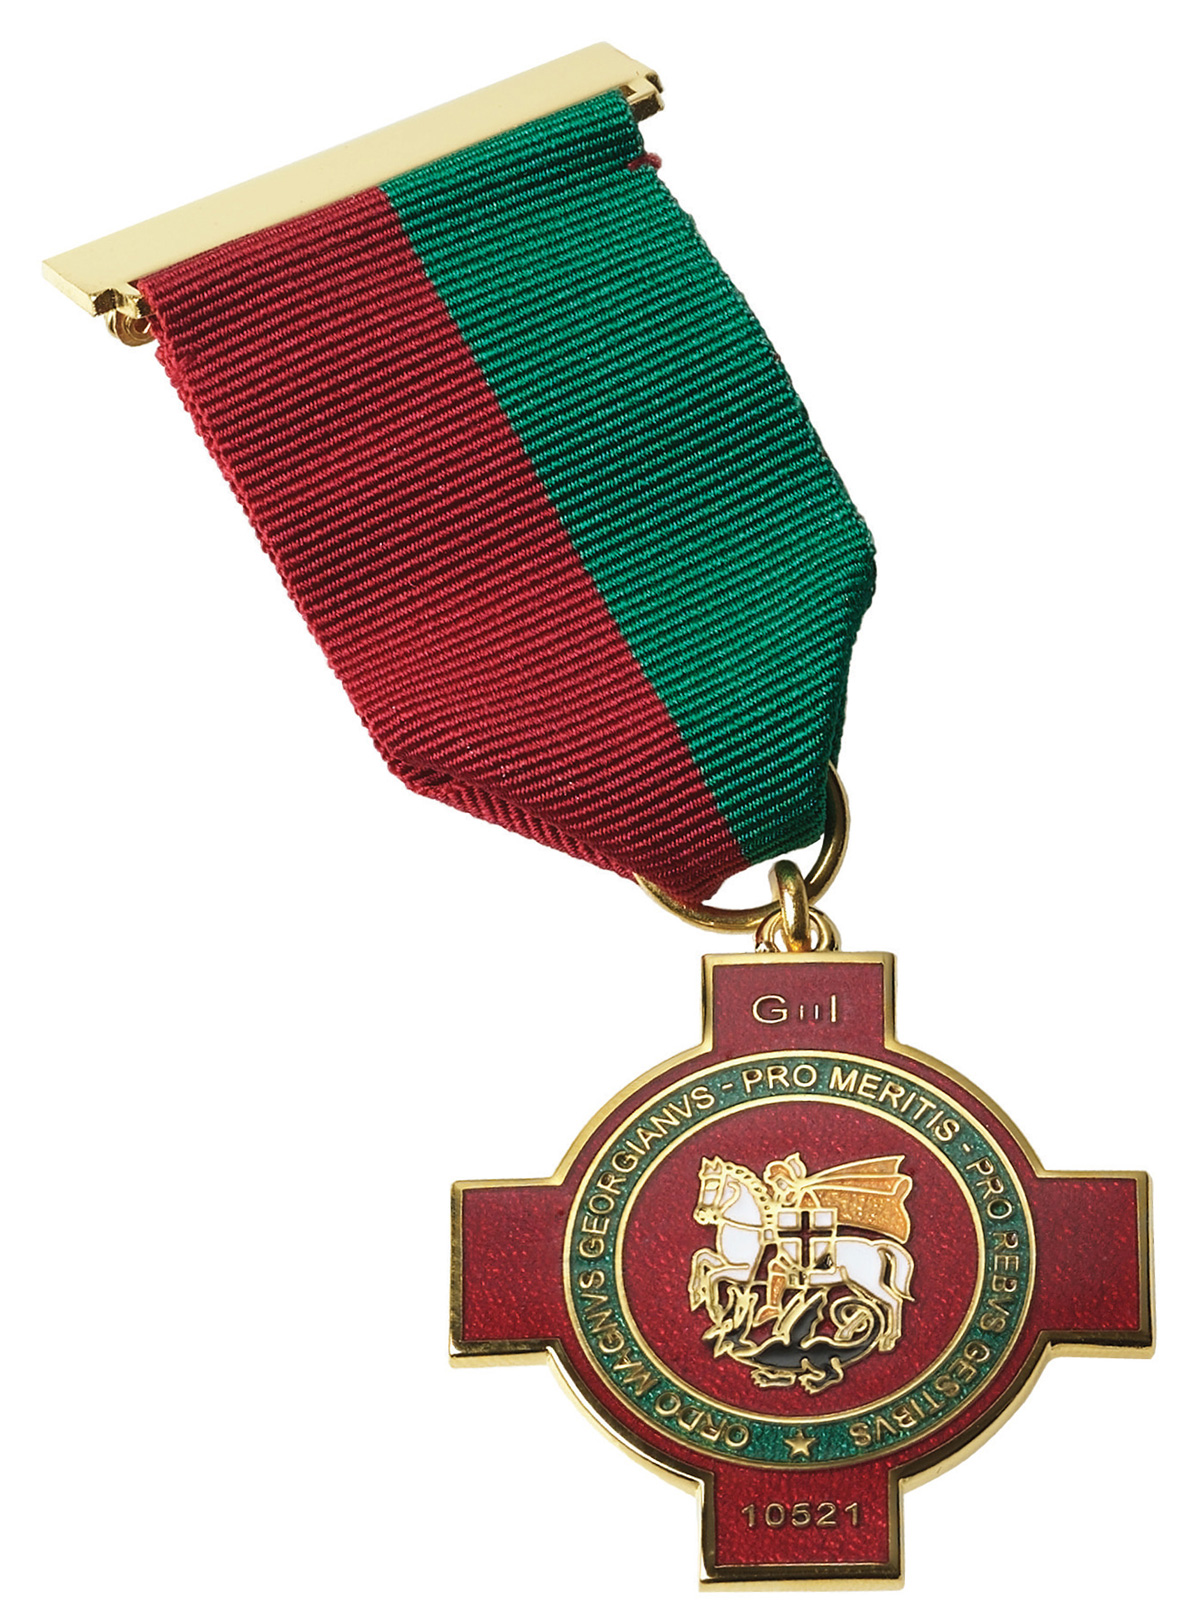 The medal of the Great Georgian Order.